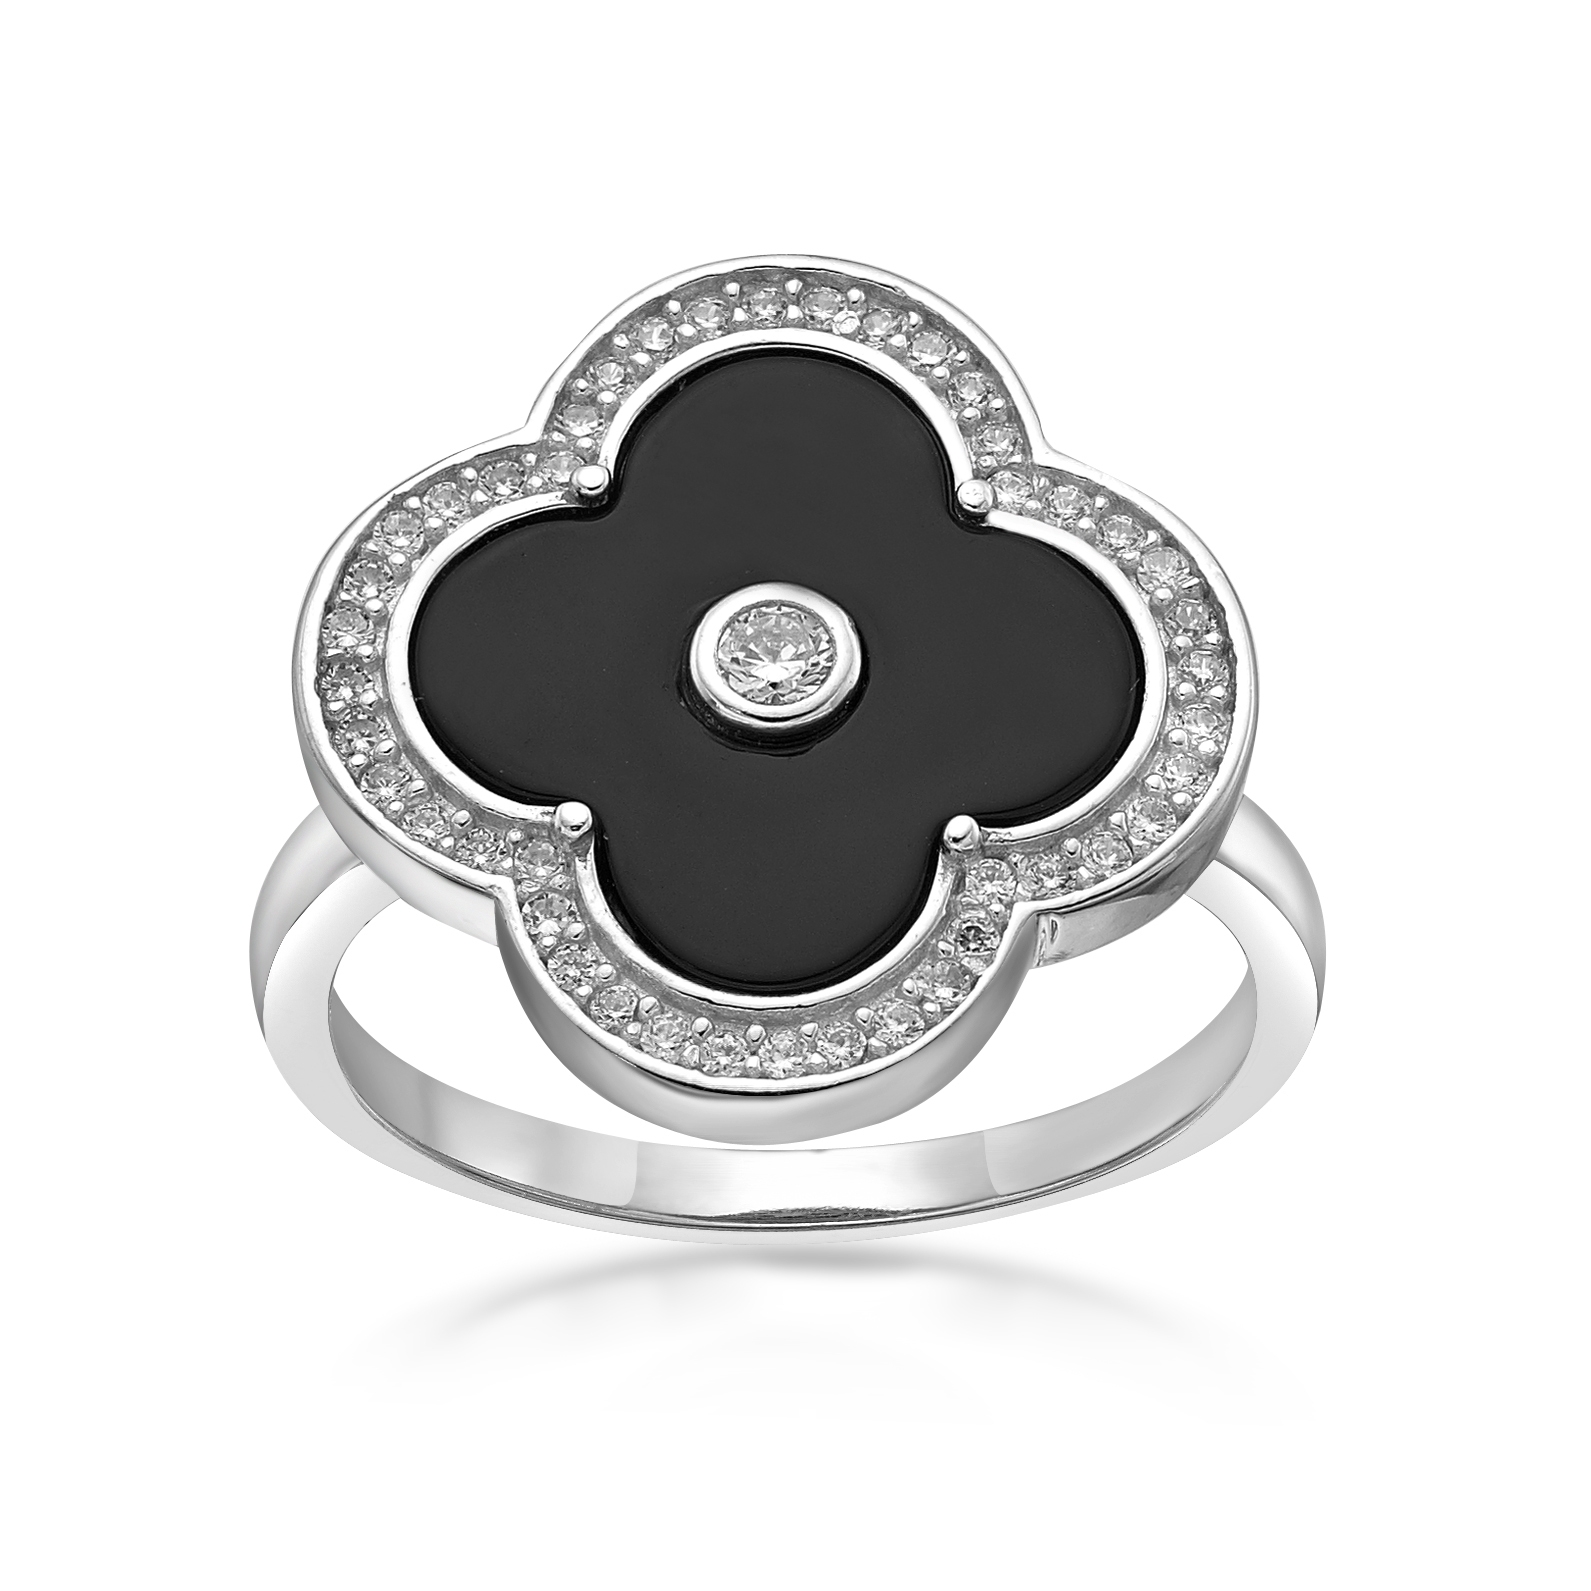 48786-ring-color-sterling-silver-0-1.jpg